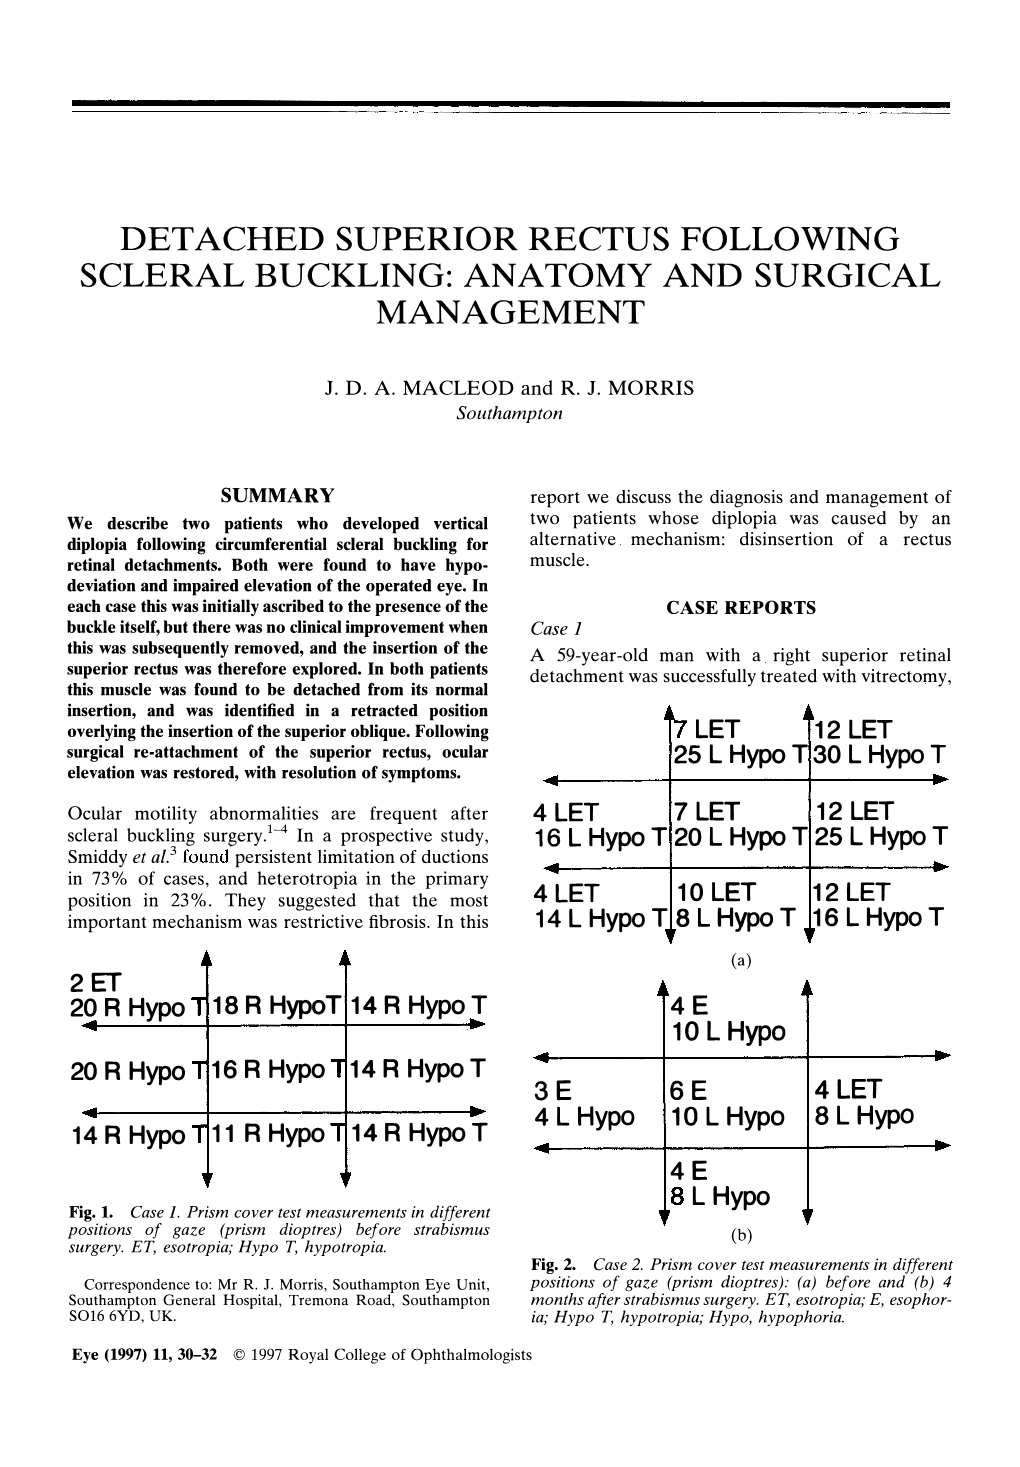 Detached Superior Rectus Following Scleral Buckling: Anatomy and Surgical Management